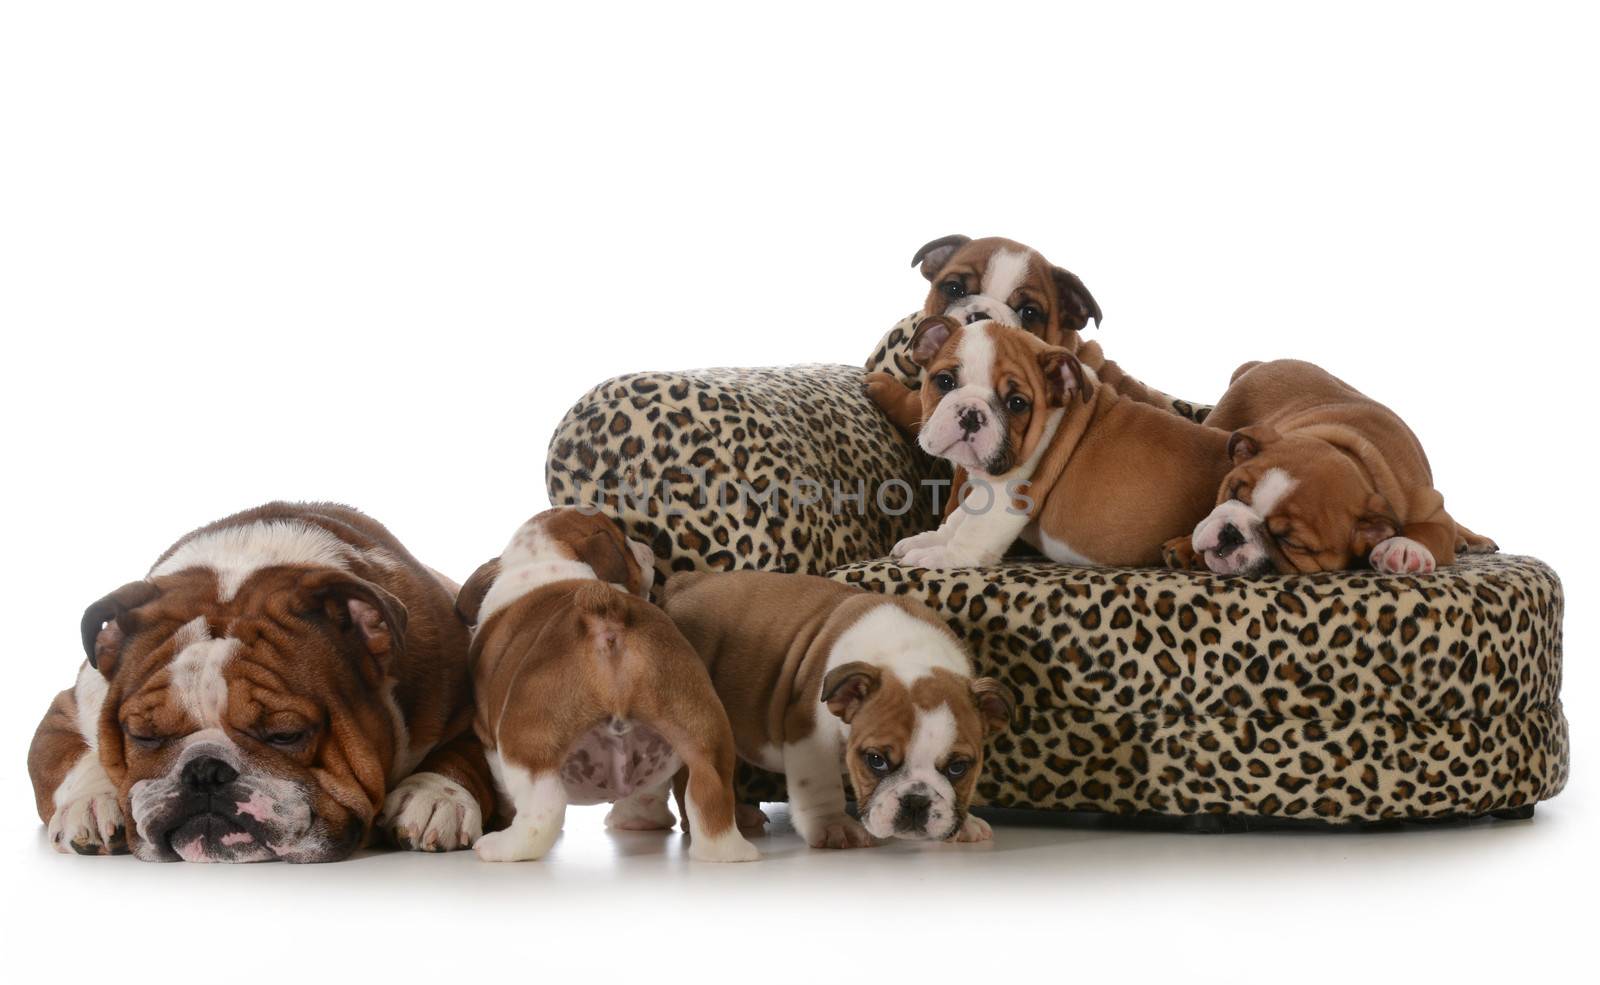 bulldog litter - five english bulldog puppies with their father sleeping beside them isolated on white background